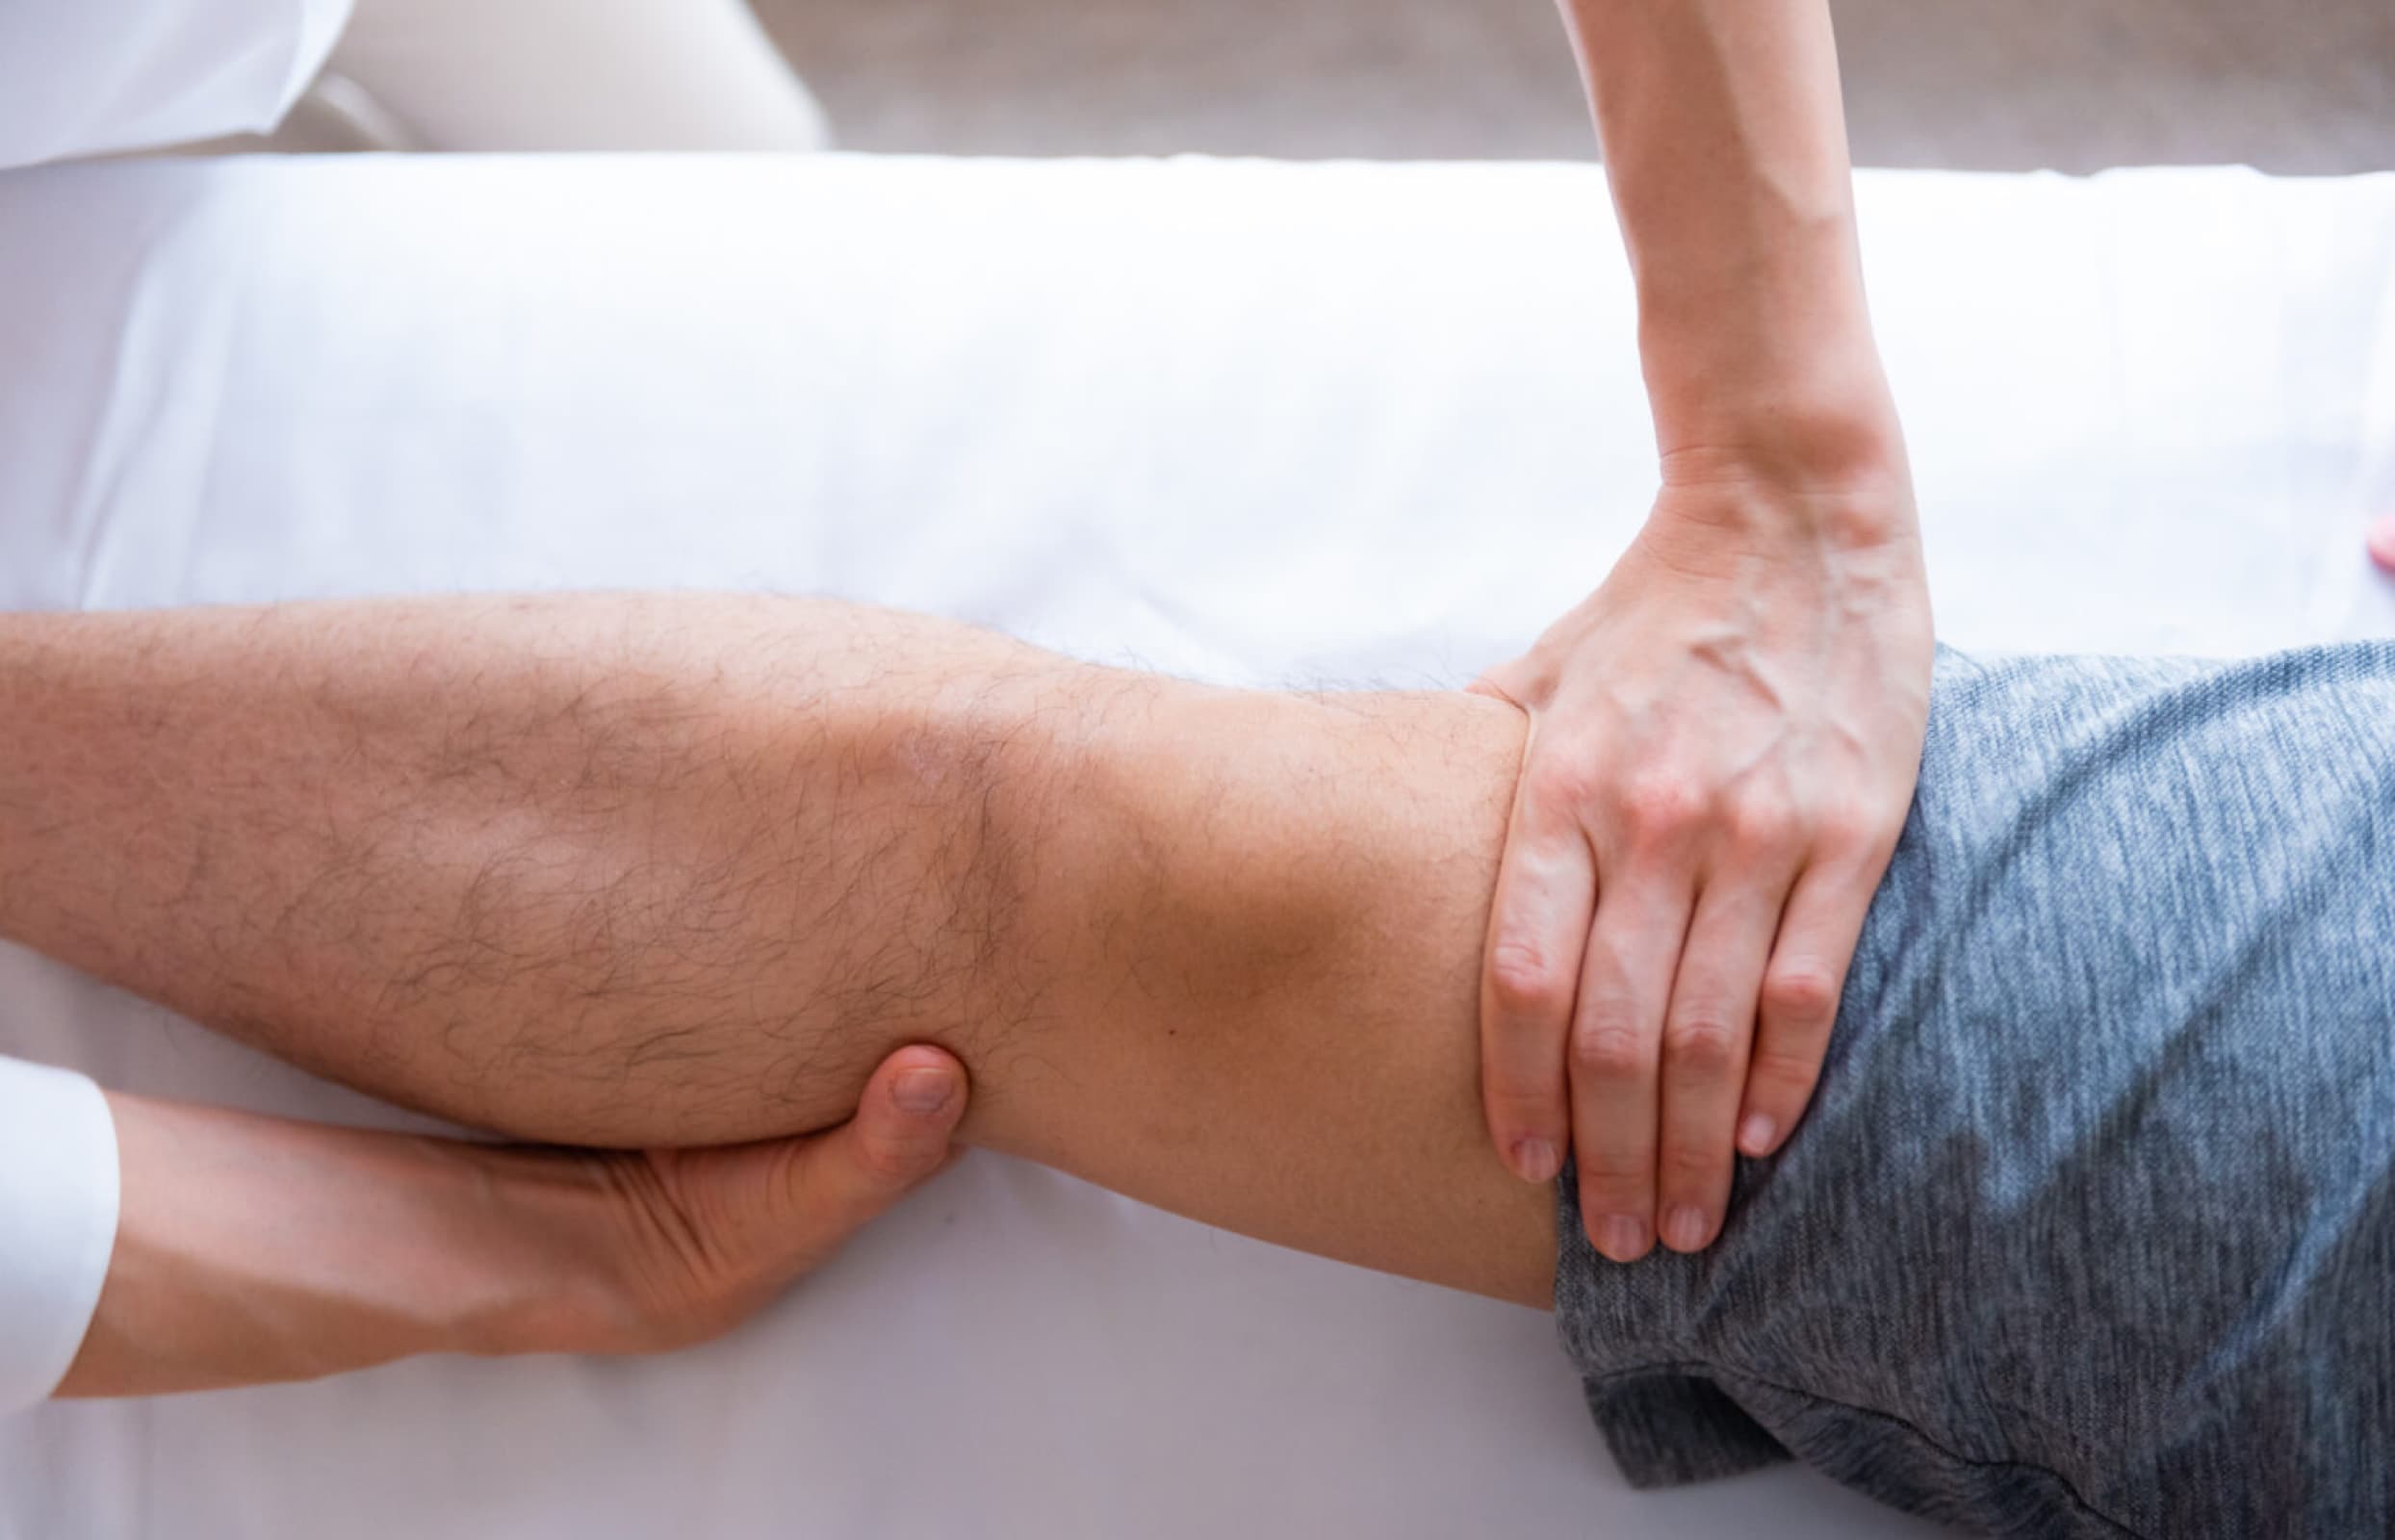 Osteopathic treatment of the lower body